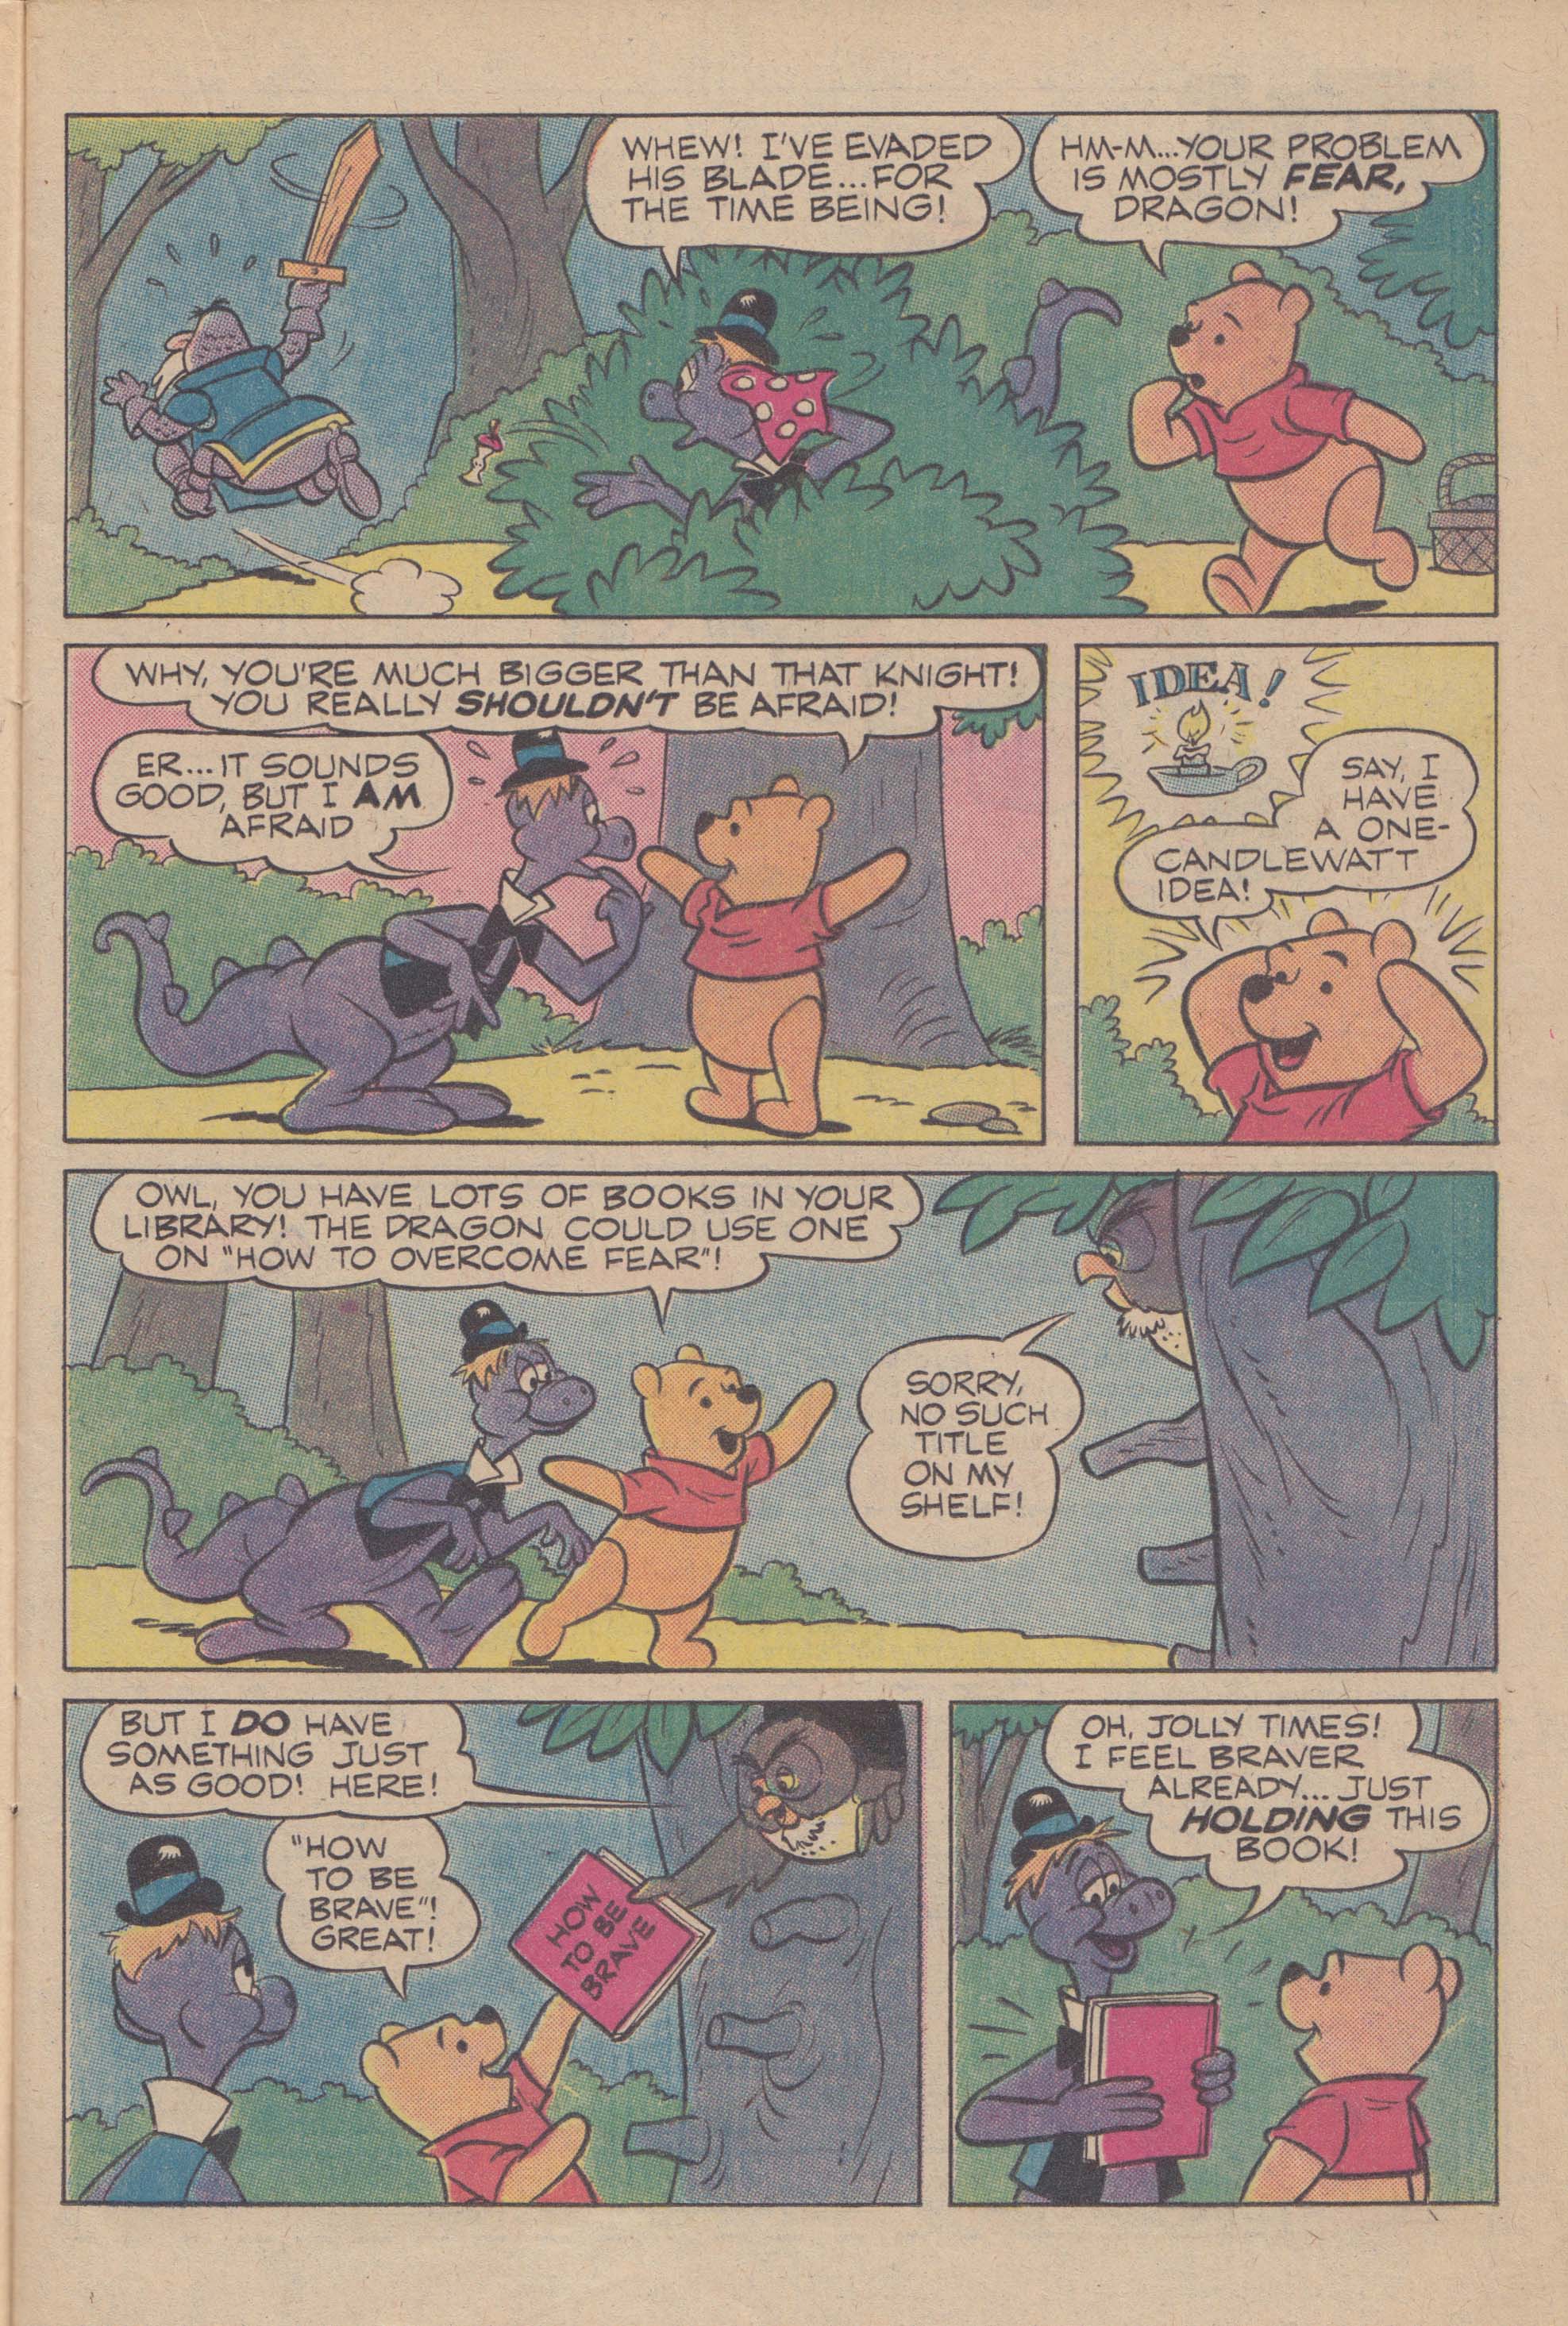 Read online Winnie-the-Pooh comic -  Issue #23 - 13